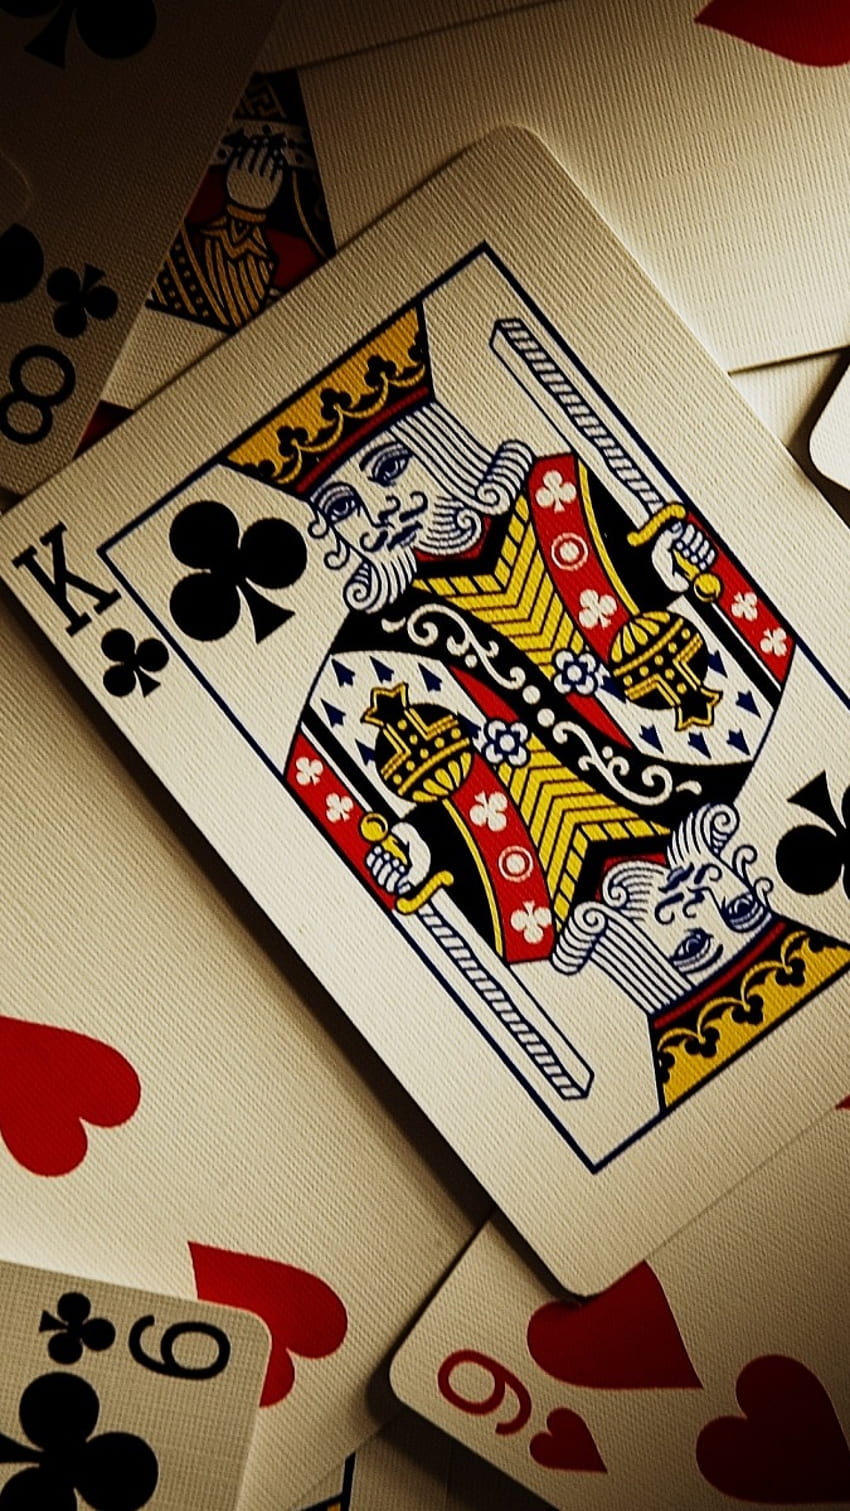 Playing Cards Photos Download The BEST Free Playing Cards Stock Photos   HD Images